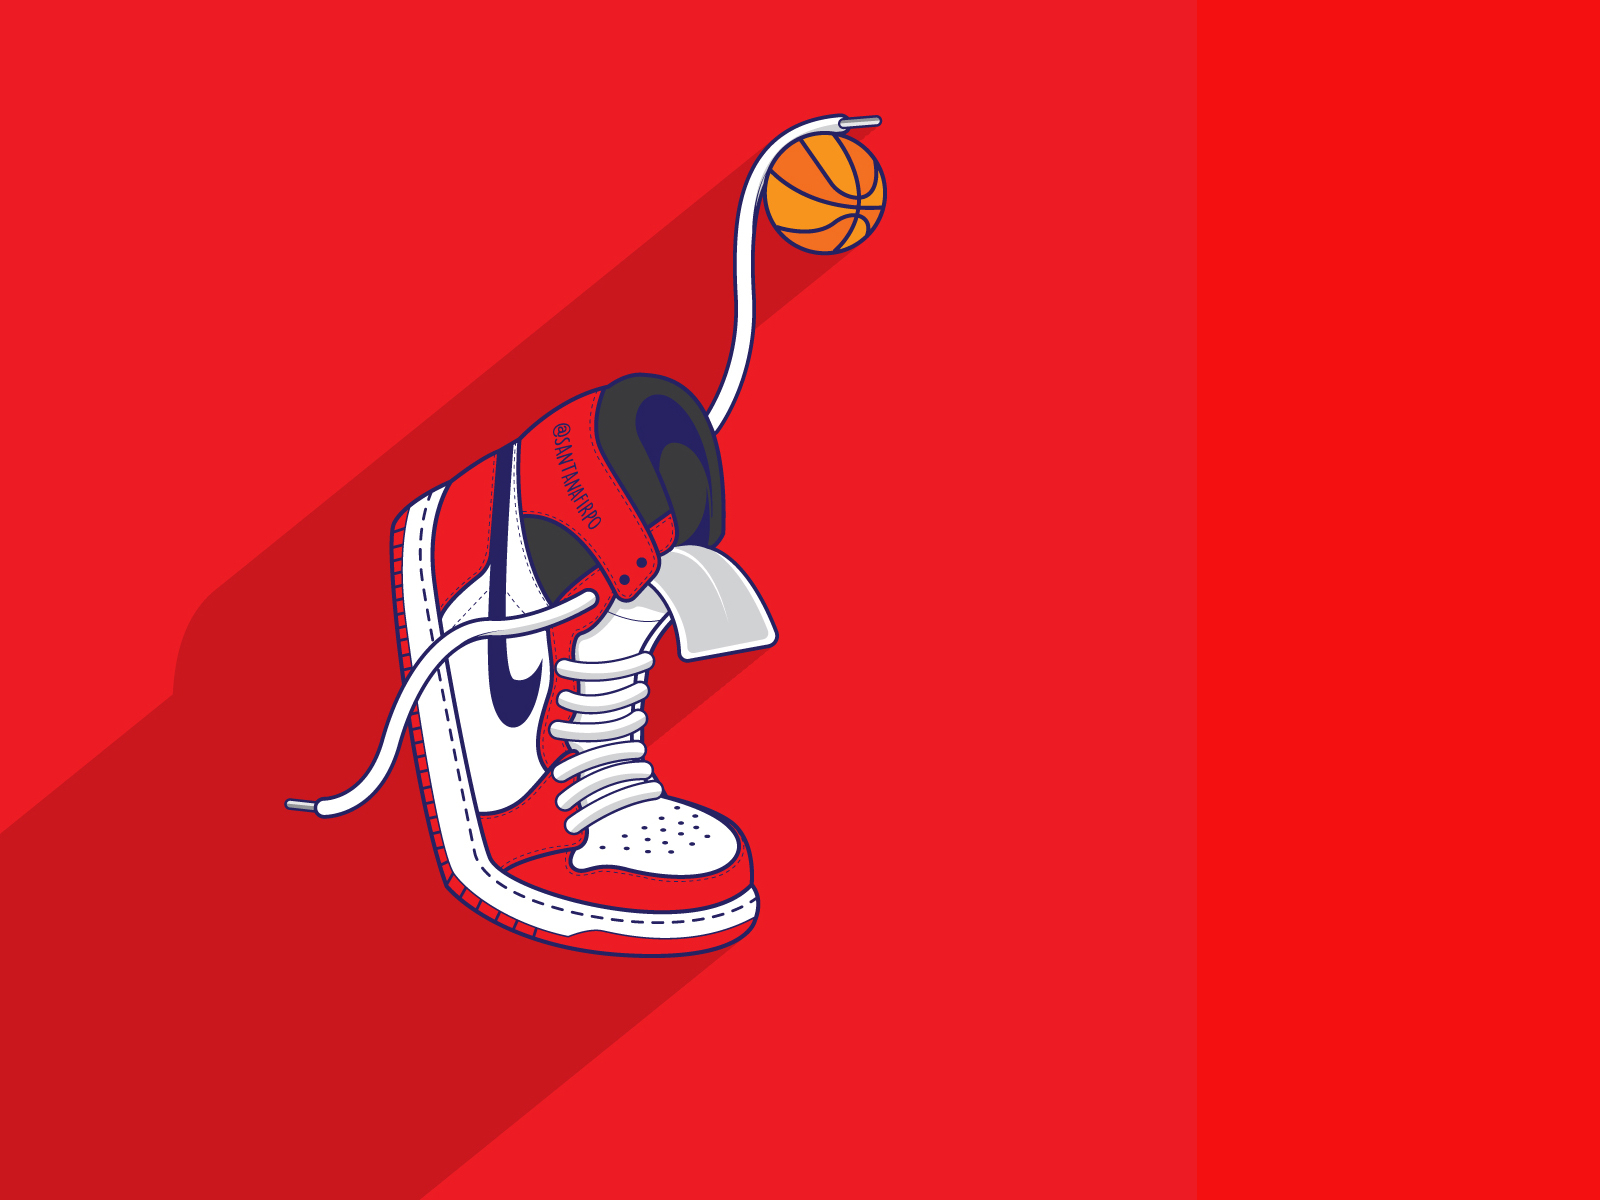 Featured image of post Cartoon Jordan 1 Wallpaper - 500 sneakers pictures hd download free images on unsplash.